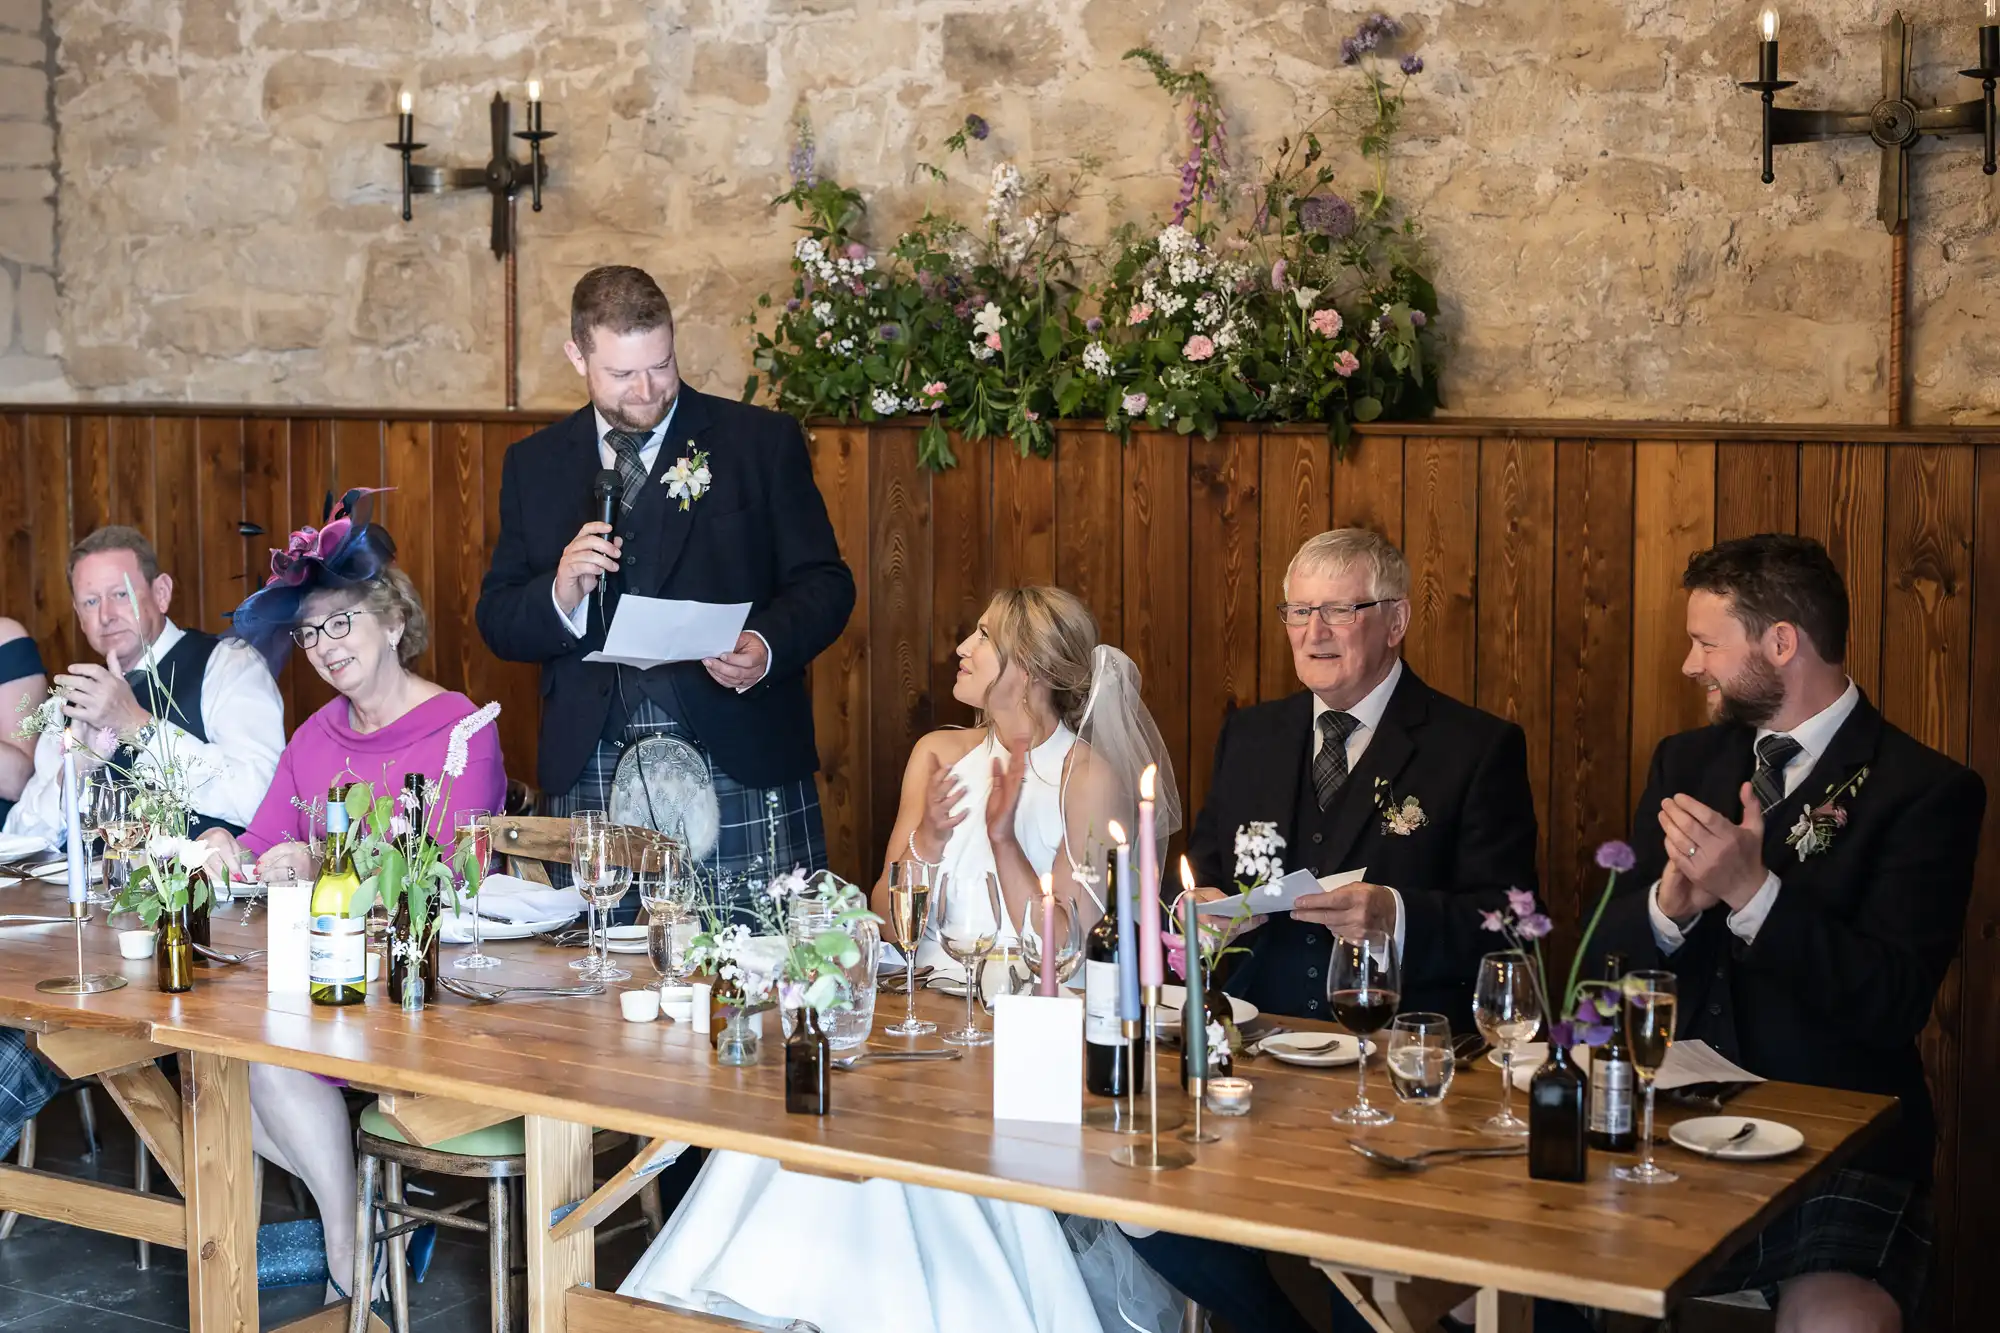 A man delivers a speech at a wedding reception table while other guests listen attentively in a rustic venue decorated with flowers.